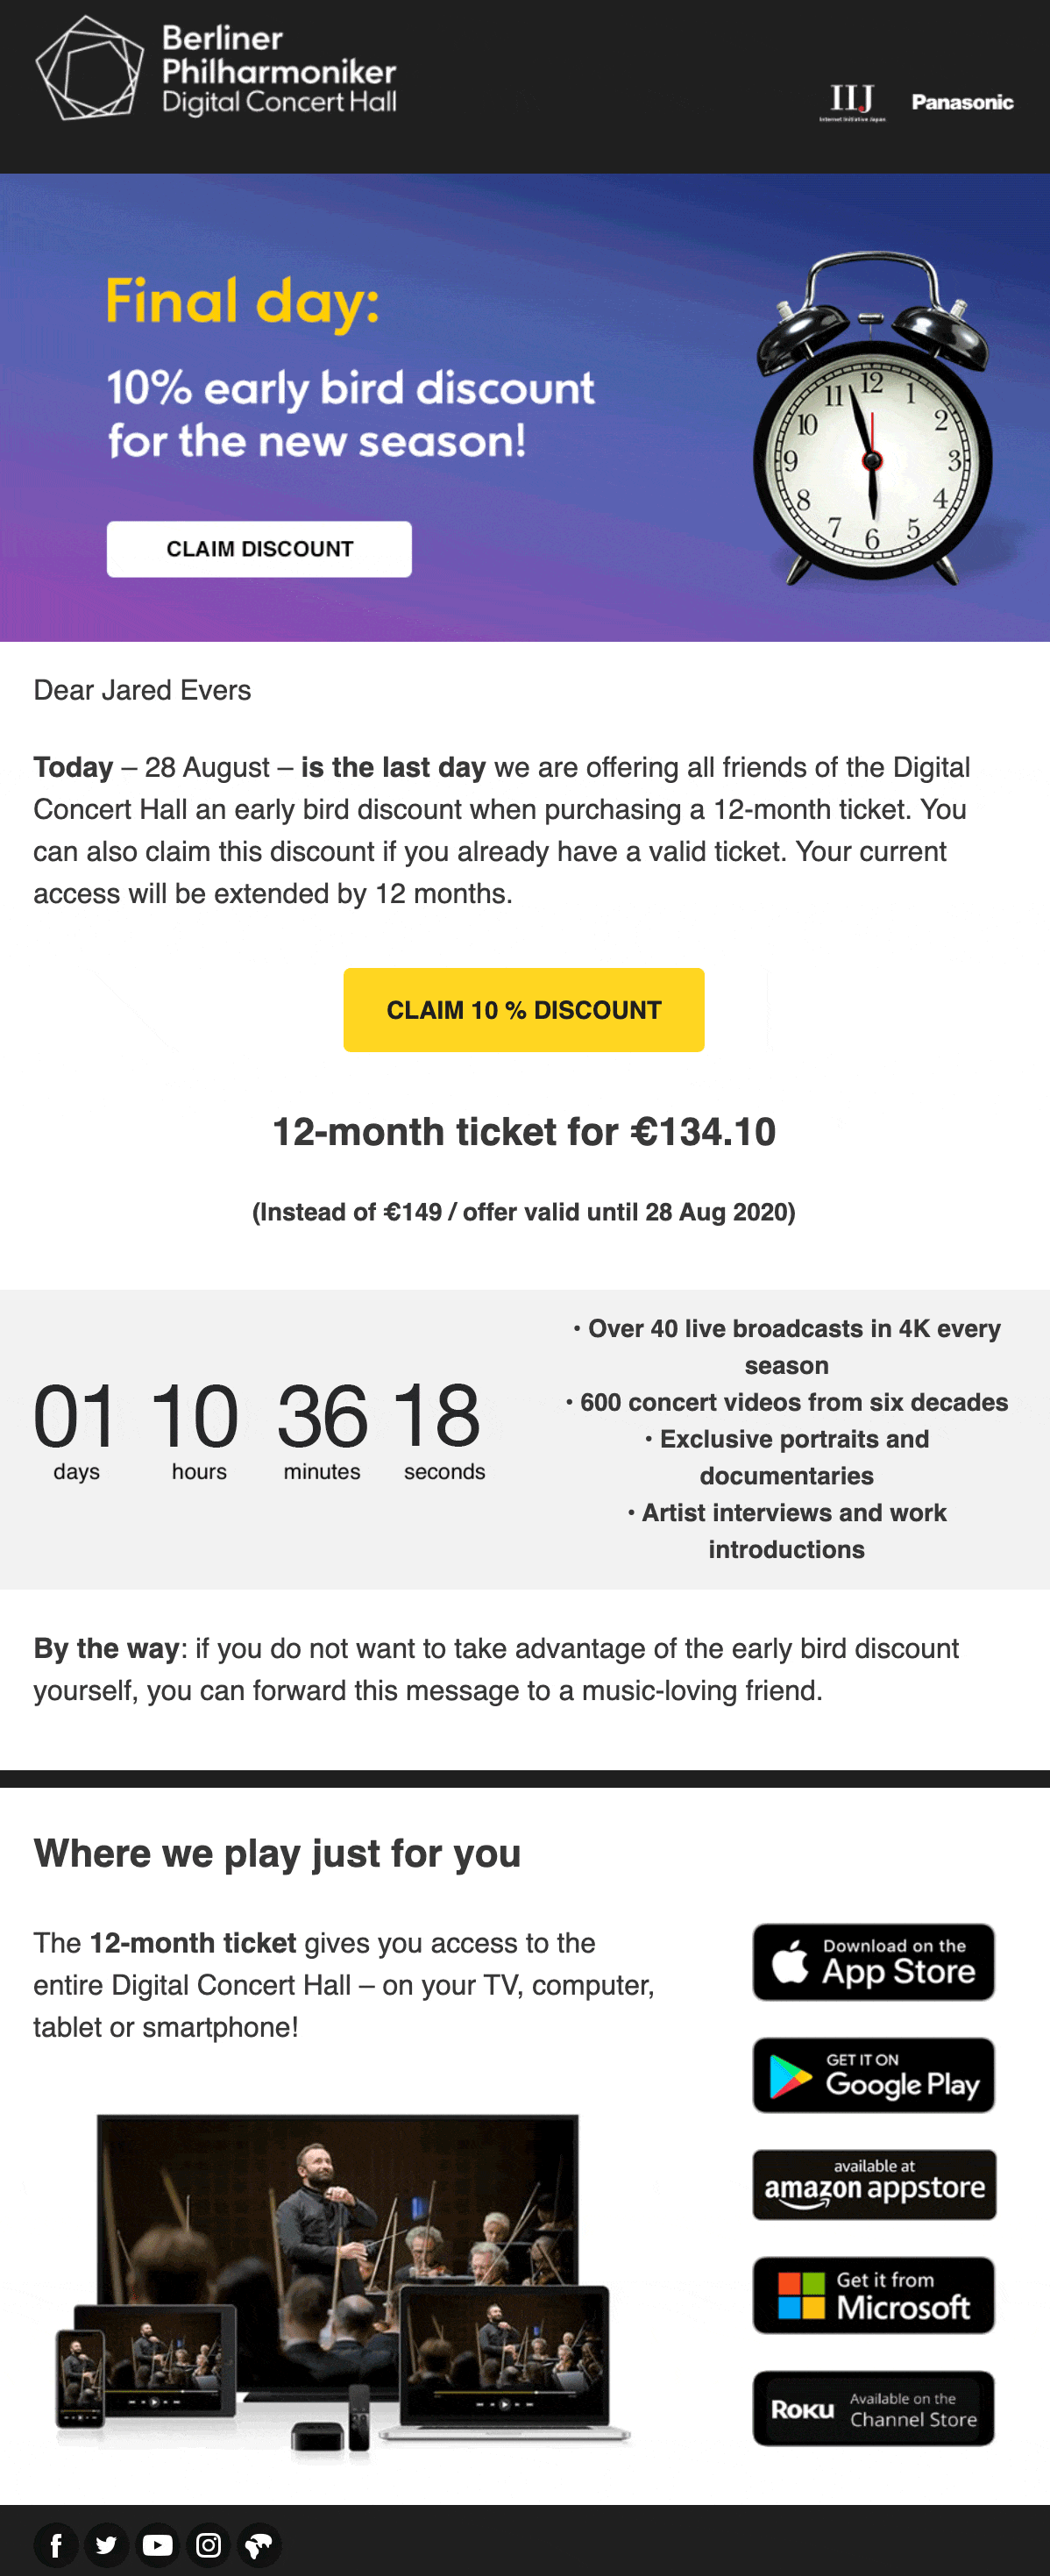 Berliner Philharmoniker uses countdown timer in their email campaign to convert subscribers 